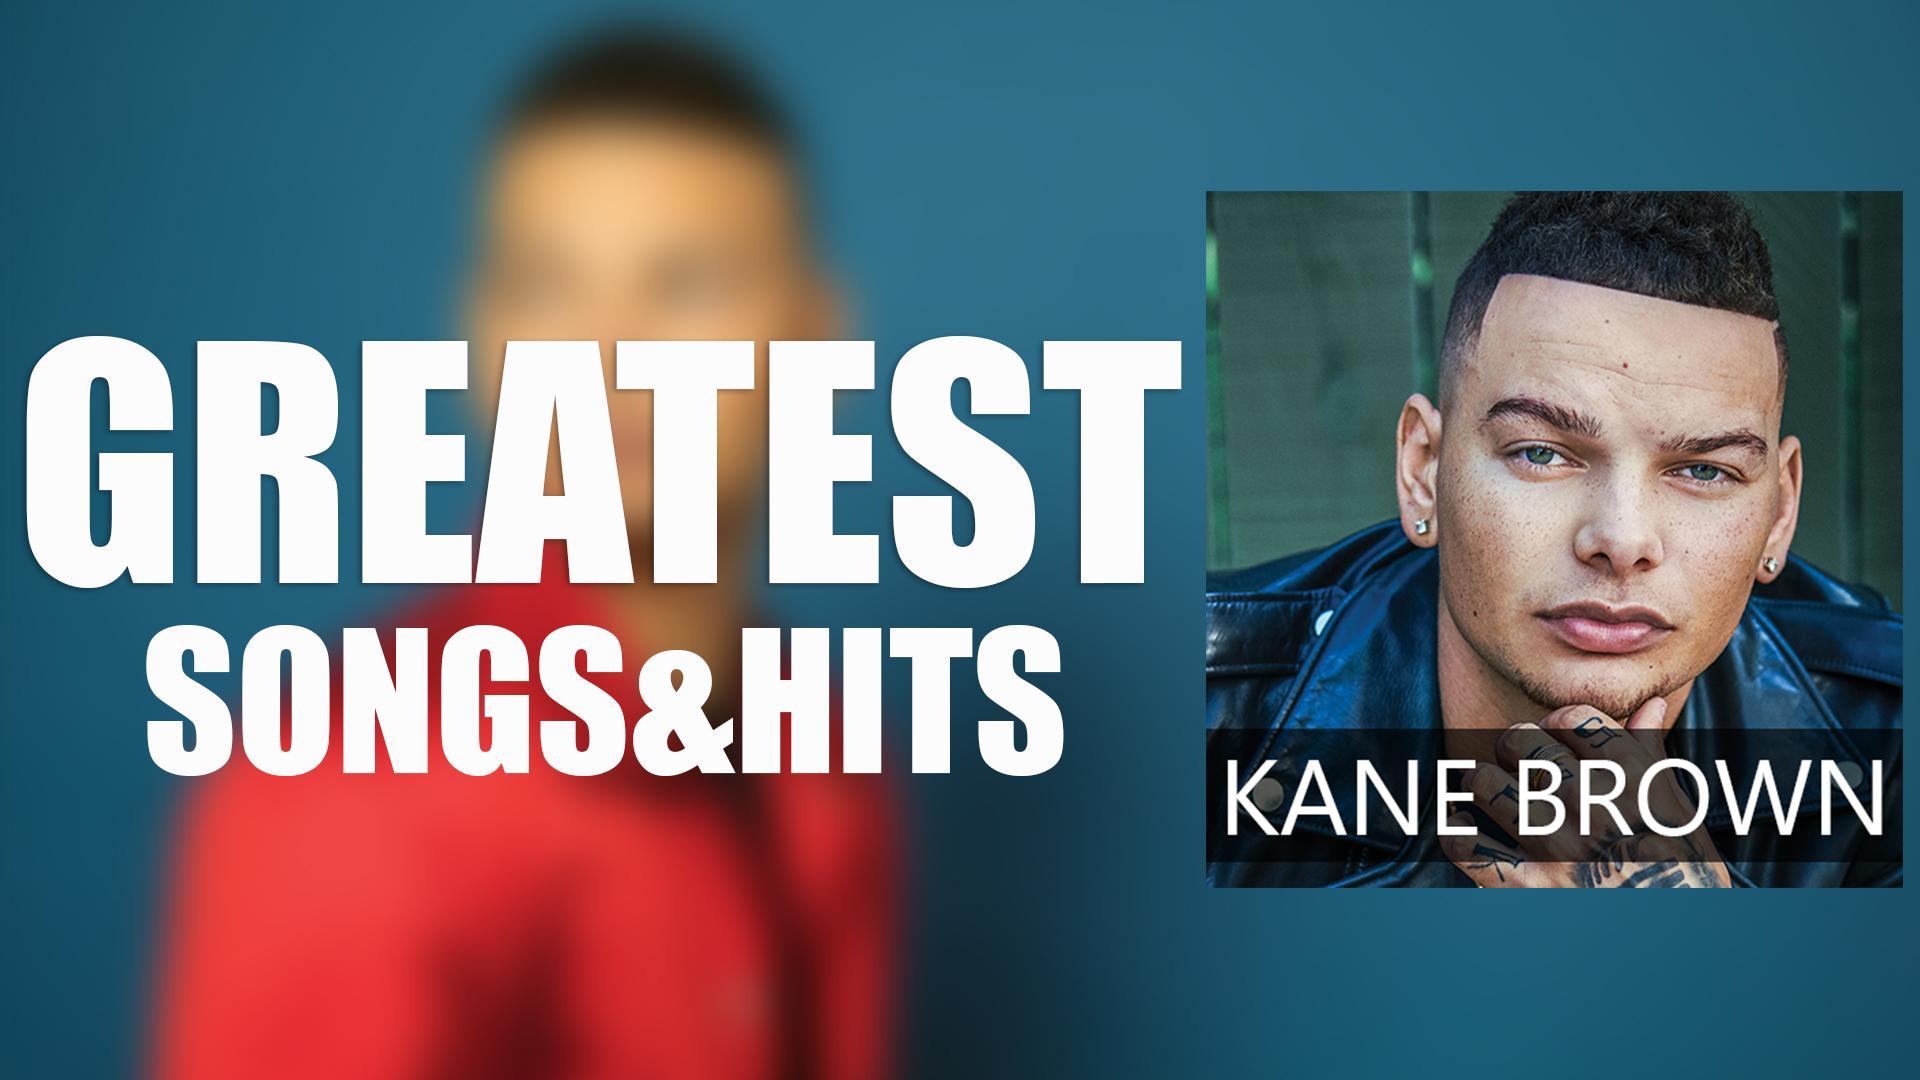 Kane Brown Songs For Android Apk Download